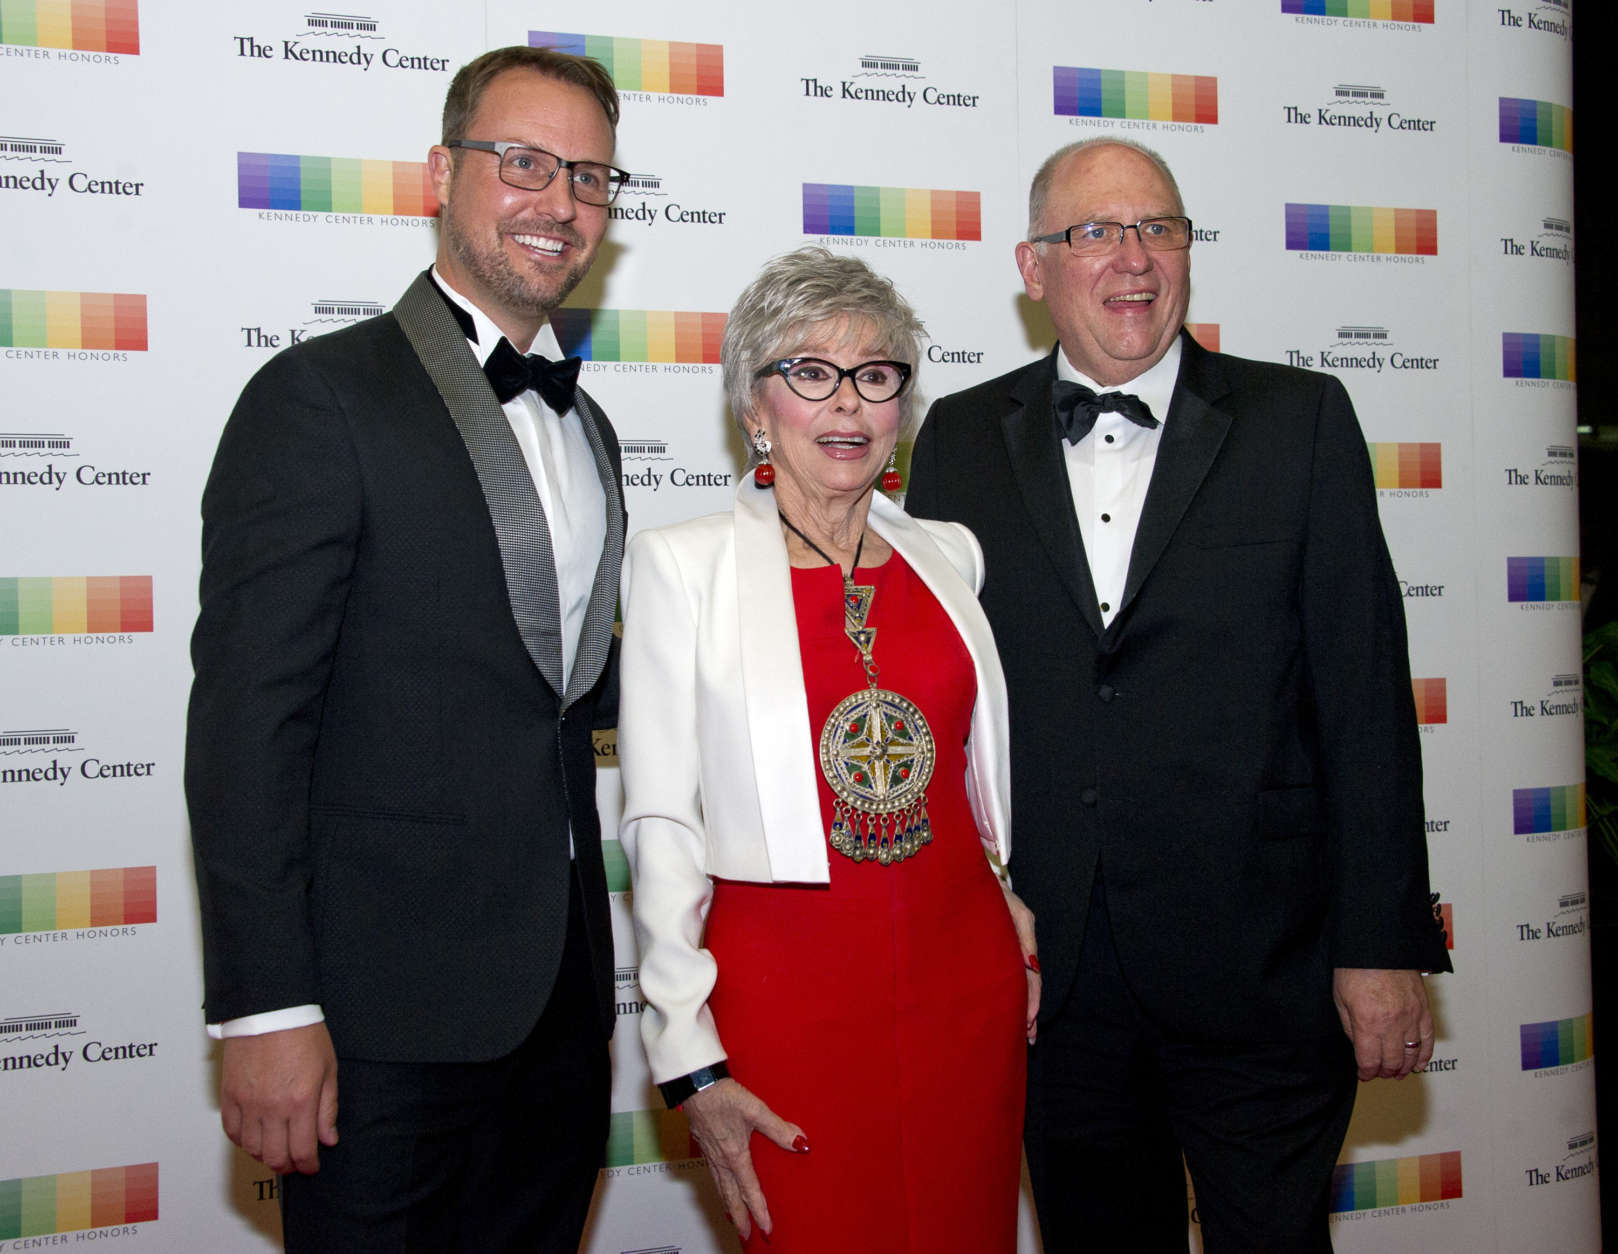 WASHINGTON, DC - DECEMBER 02: From left, Producer Brent Miller, 2015 Kennedy Center Honoree Rita Moreno, and manager John Ferguson arrive for the formal Artist's Dinner hosted by United States Secretary of State Rex Tillerson in their honor at the US Department of State on December 2, 2017 in Washington, D.C.   From left to right back row: LL Cool J and Lionel Richie  Front row, left to right: Carmen de Lavallade, Norman Lear and Gloria Estefan.  The 2017 honorees are: American dancer and choreographer Carmen de Lavallade; Cuban American singer-songwriter and actress Gloria Estefan; American hip hop artist and entertainment icon LL COOL J; American television writer and producer Norman Lear; and American musician and record producer Lionel Richie. (Photo by Ron Sachs - Pool/Getty Images)